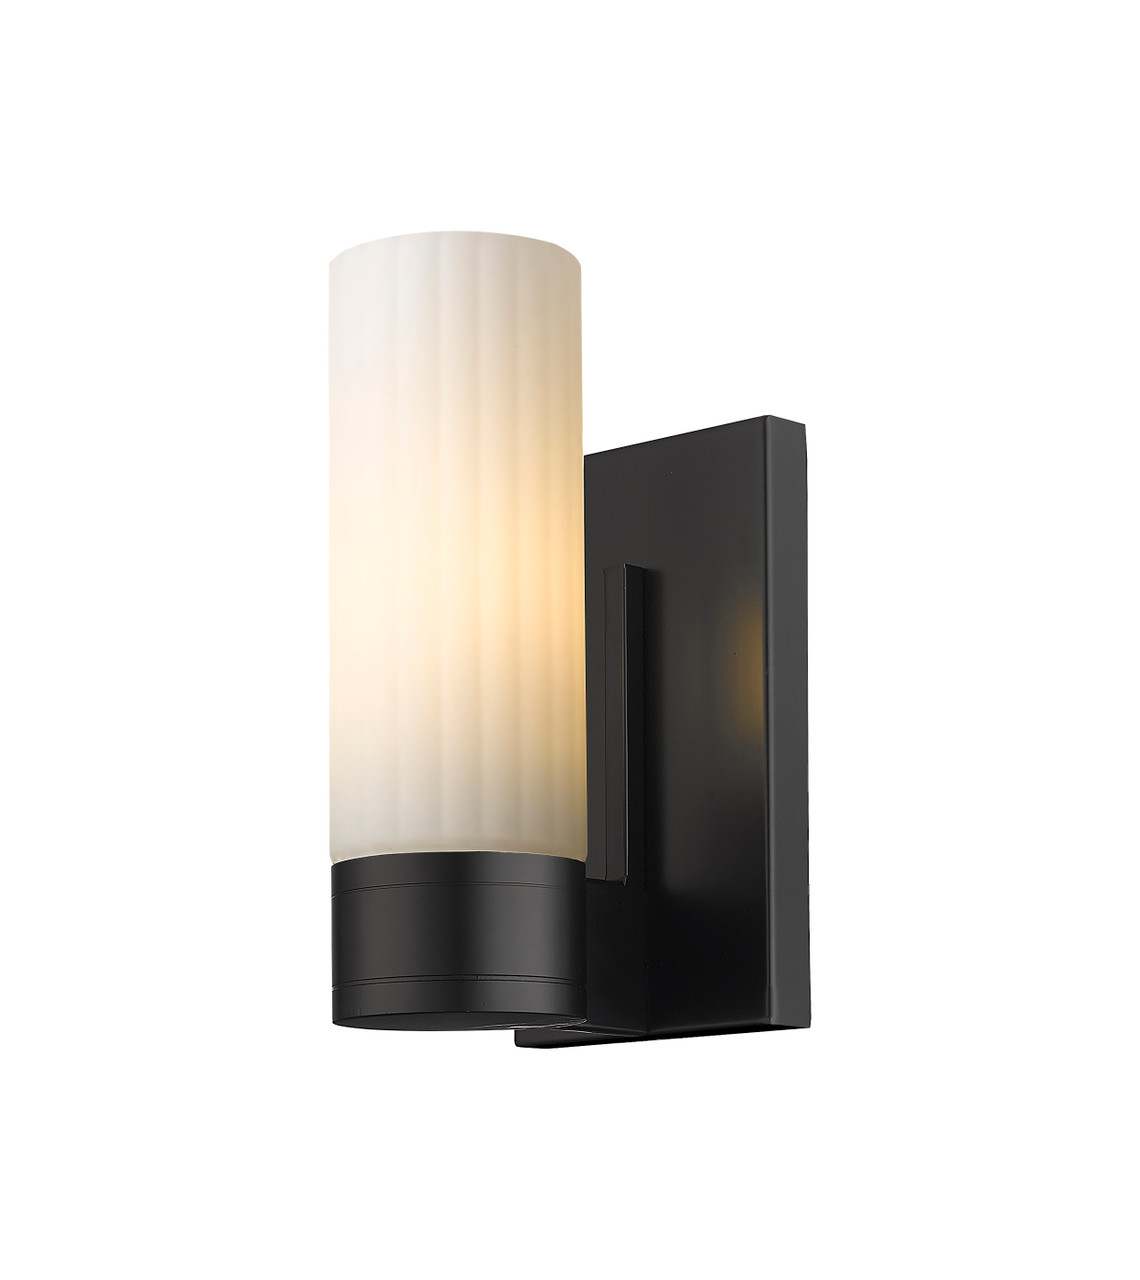 INNOVATIONS 429-1W-BK-G429-8WH Empire 1 4.5 inch Sconce Matte Black